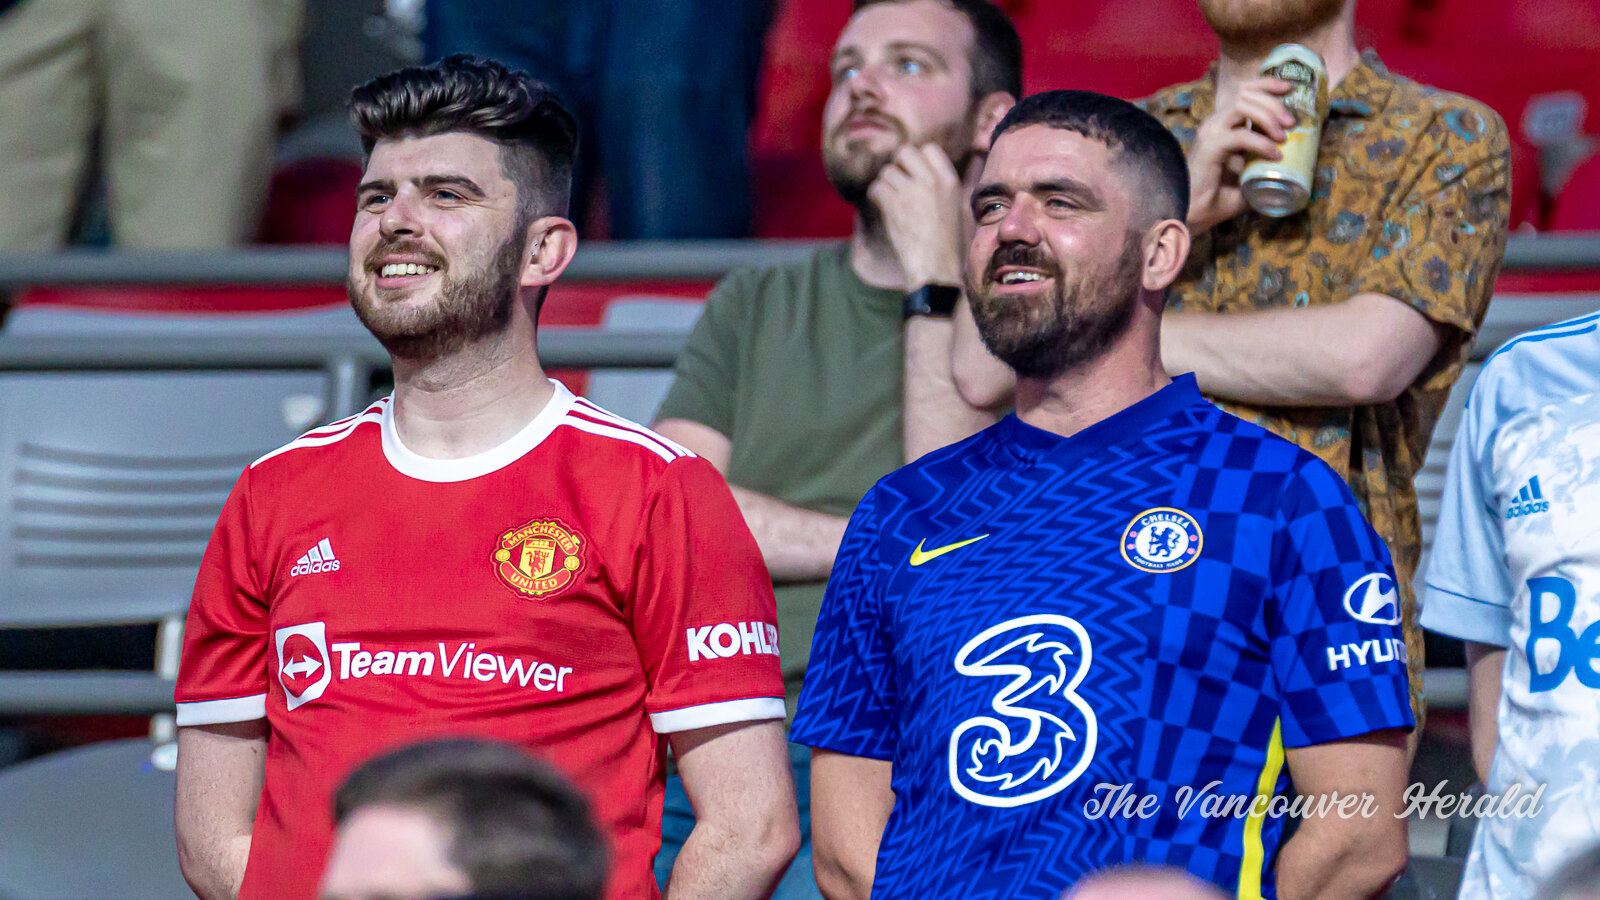 2021-09-25 Manchester United FC and Chelsea FC Supporters.jpg